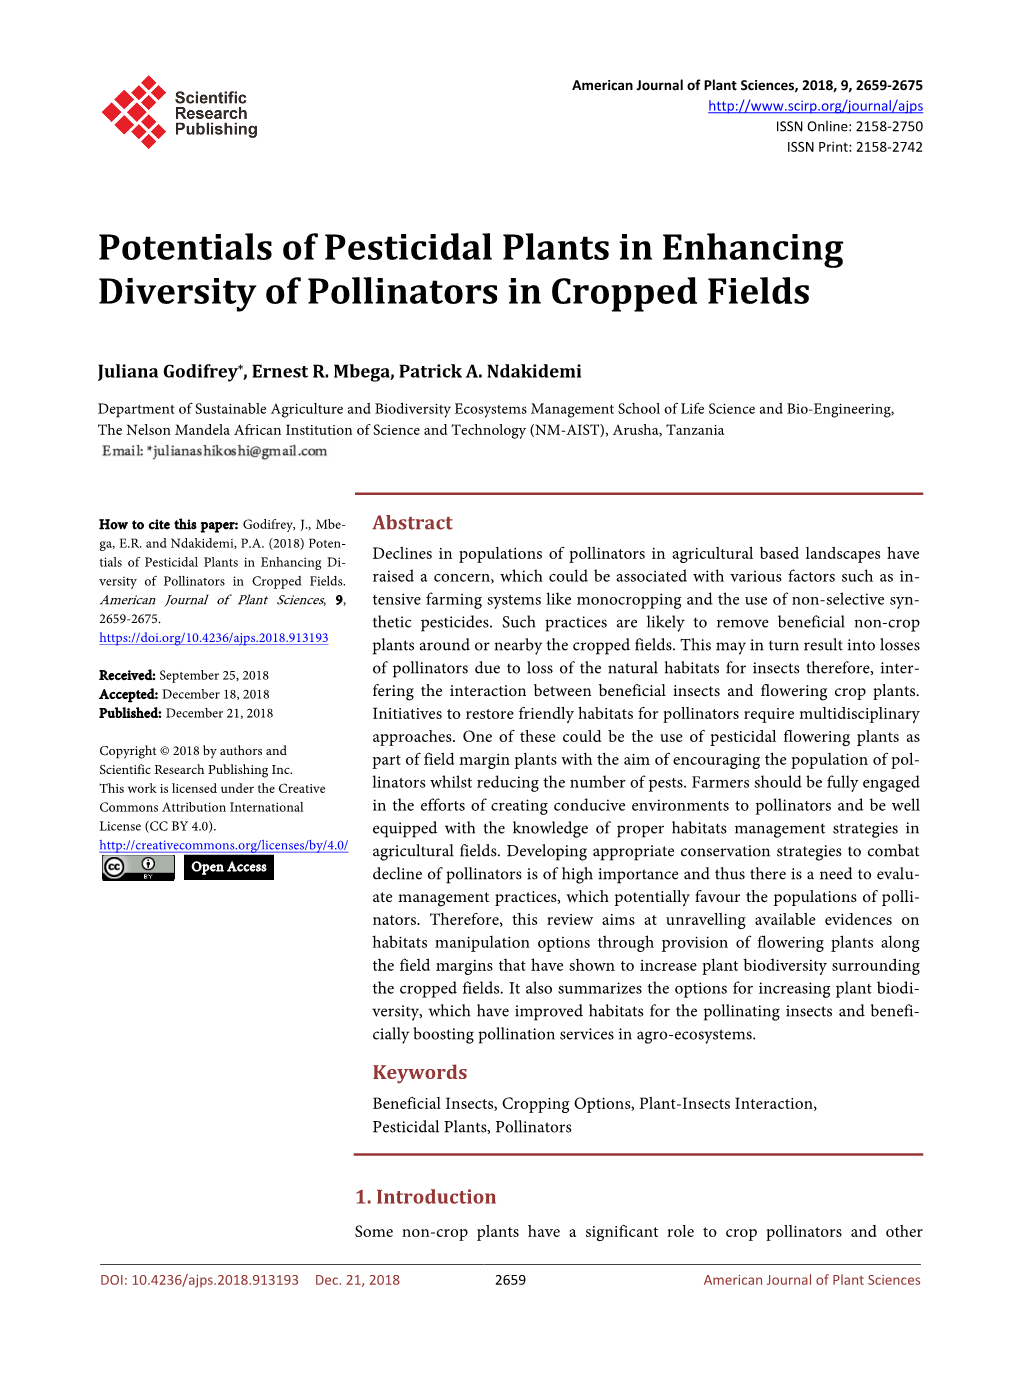 Potentials of Pesticidal Plants in Enhancing Diversity of Pollinators in Cropped Fields